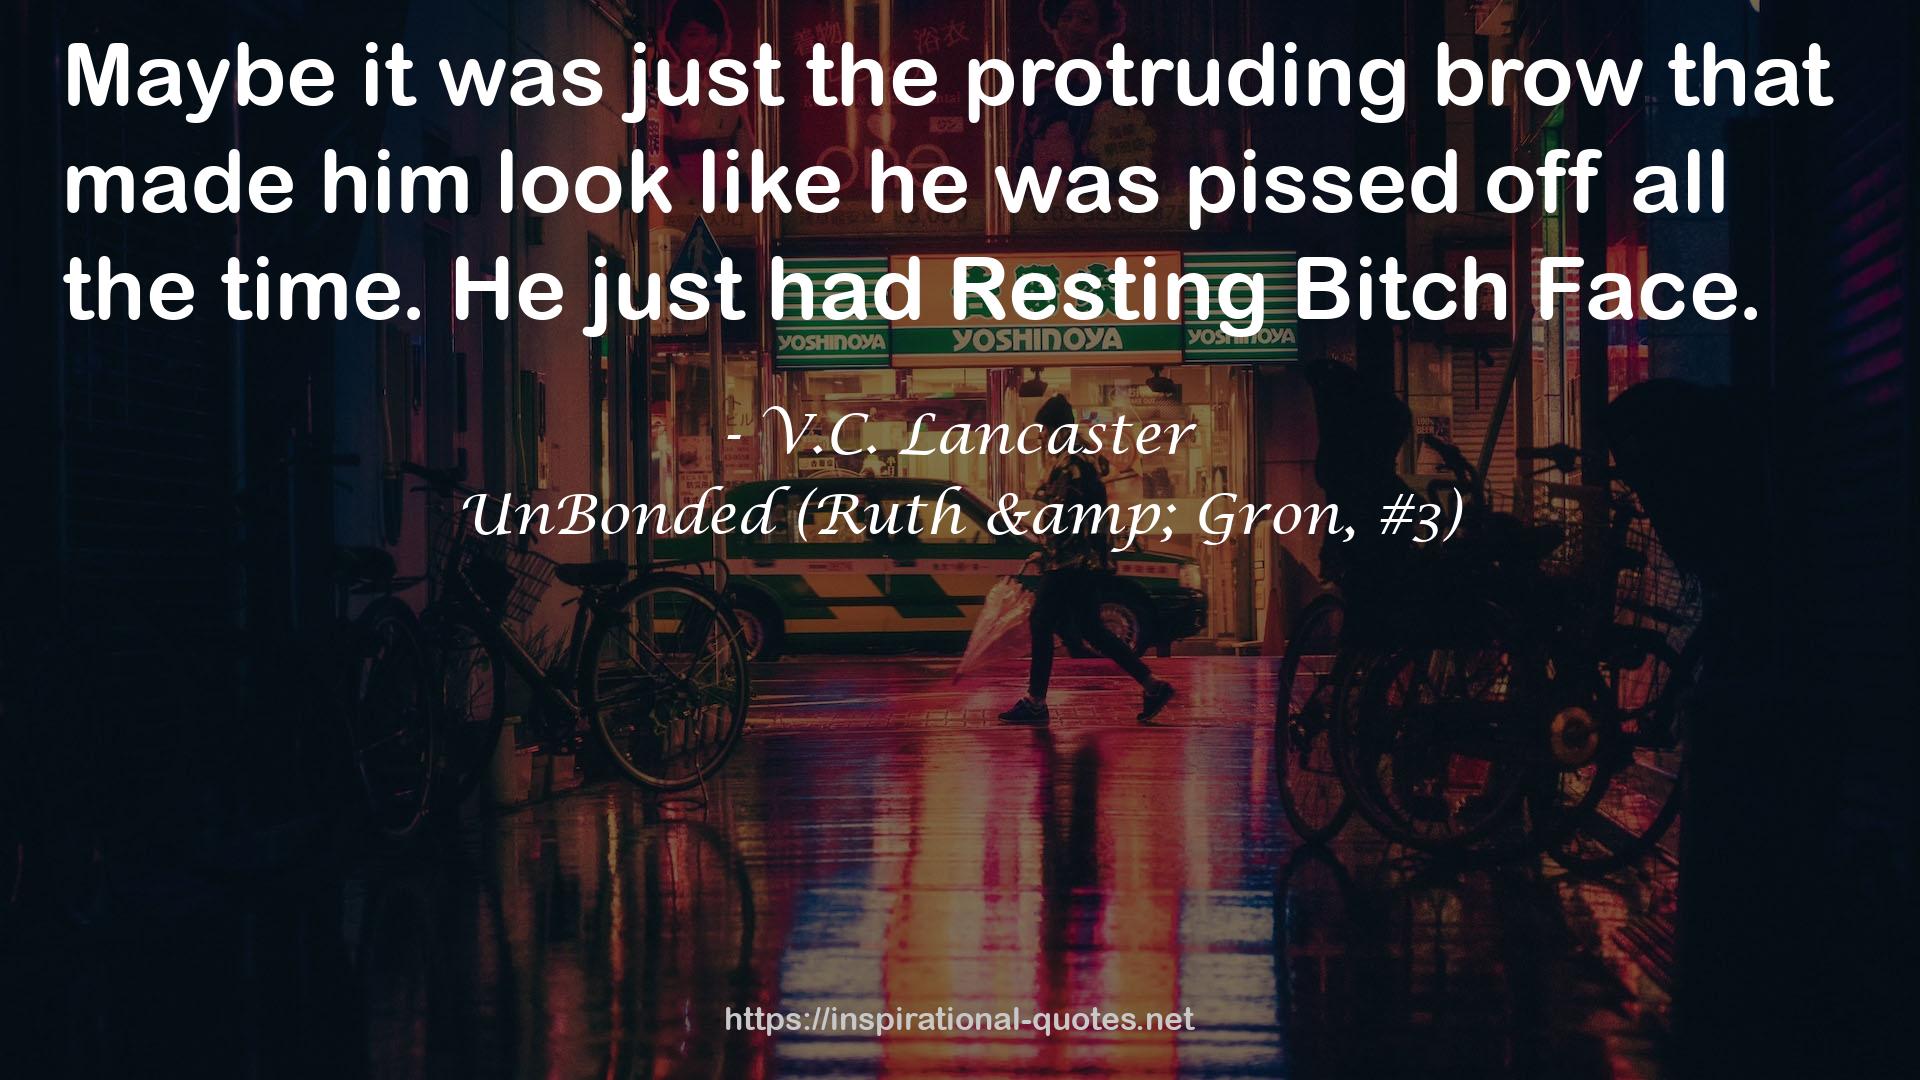 UnBonded (Ruth & Gron, #3) QUOTES